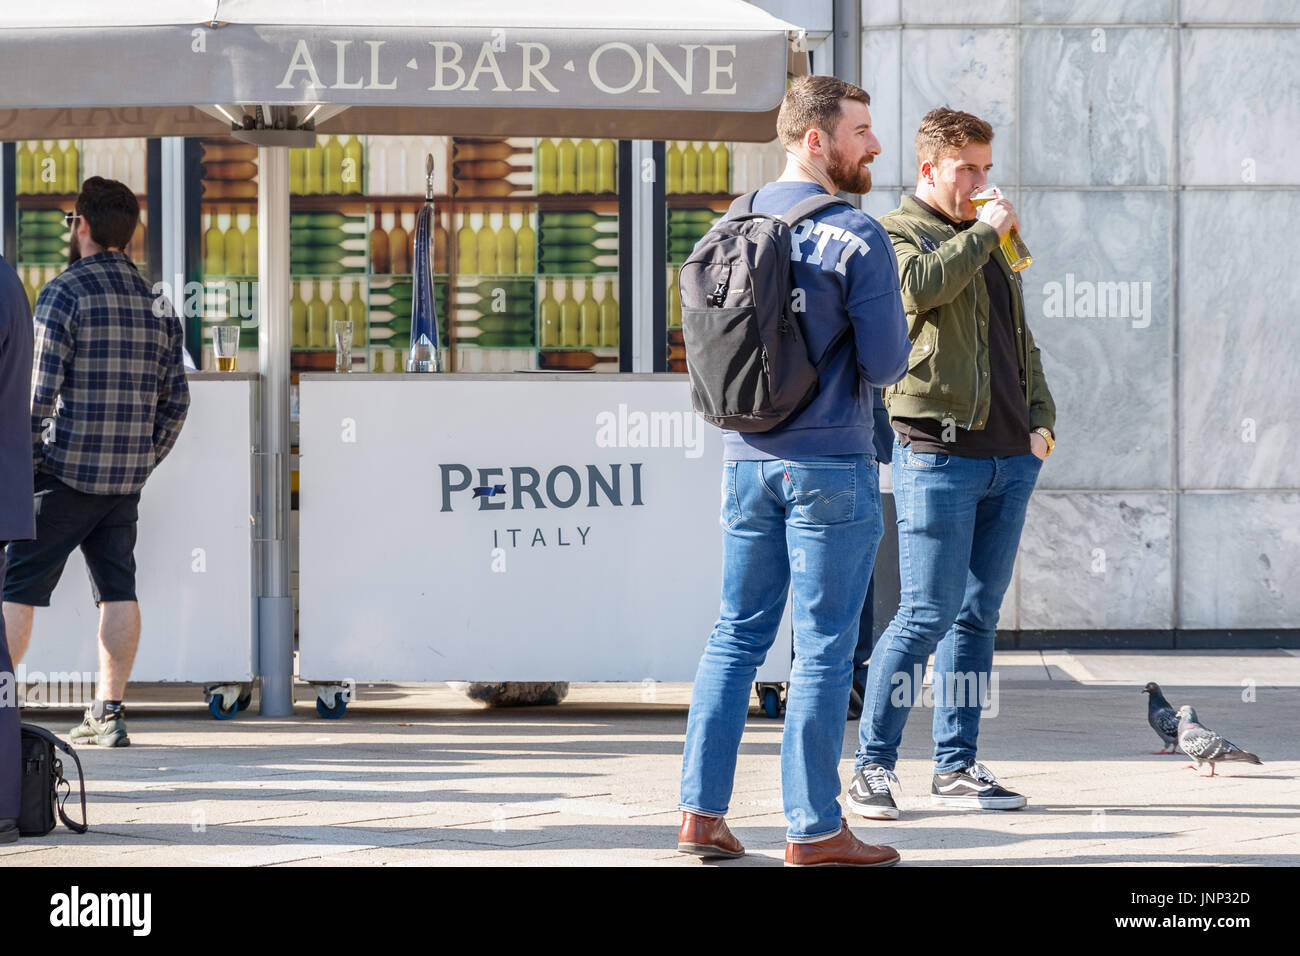 London, UK - May 10, 2017 - Two men drinking beer outside a bar in Canary Wharf on a sunny day Stock Photo